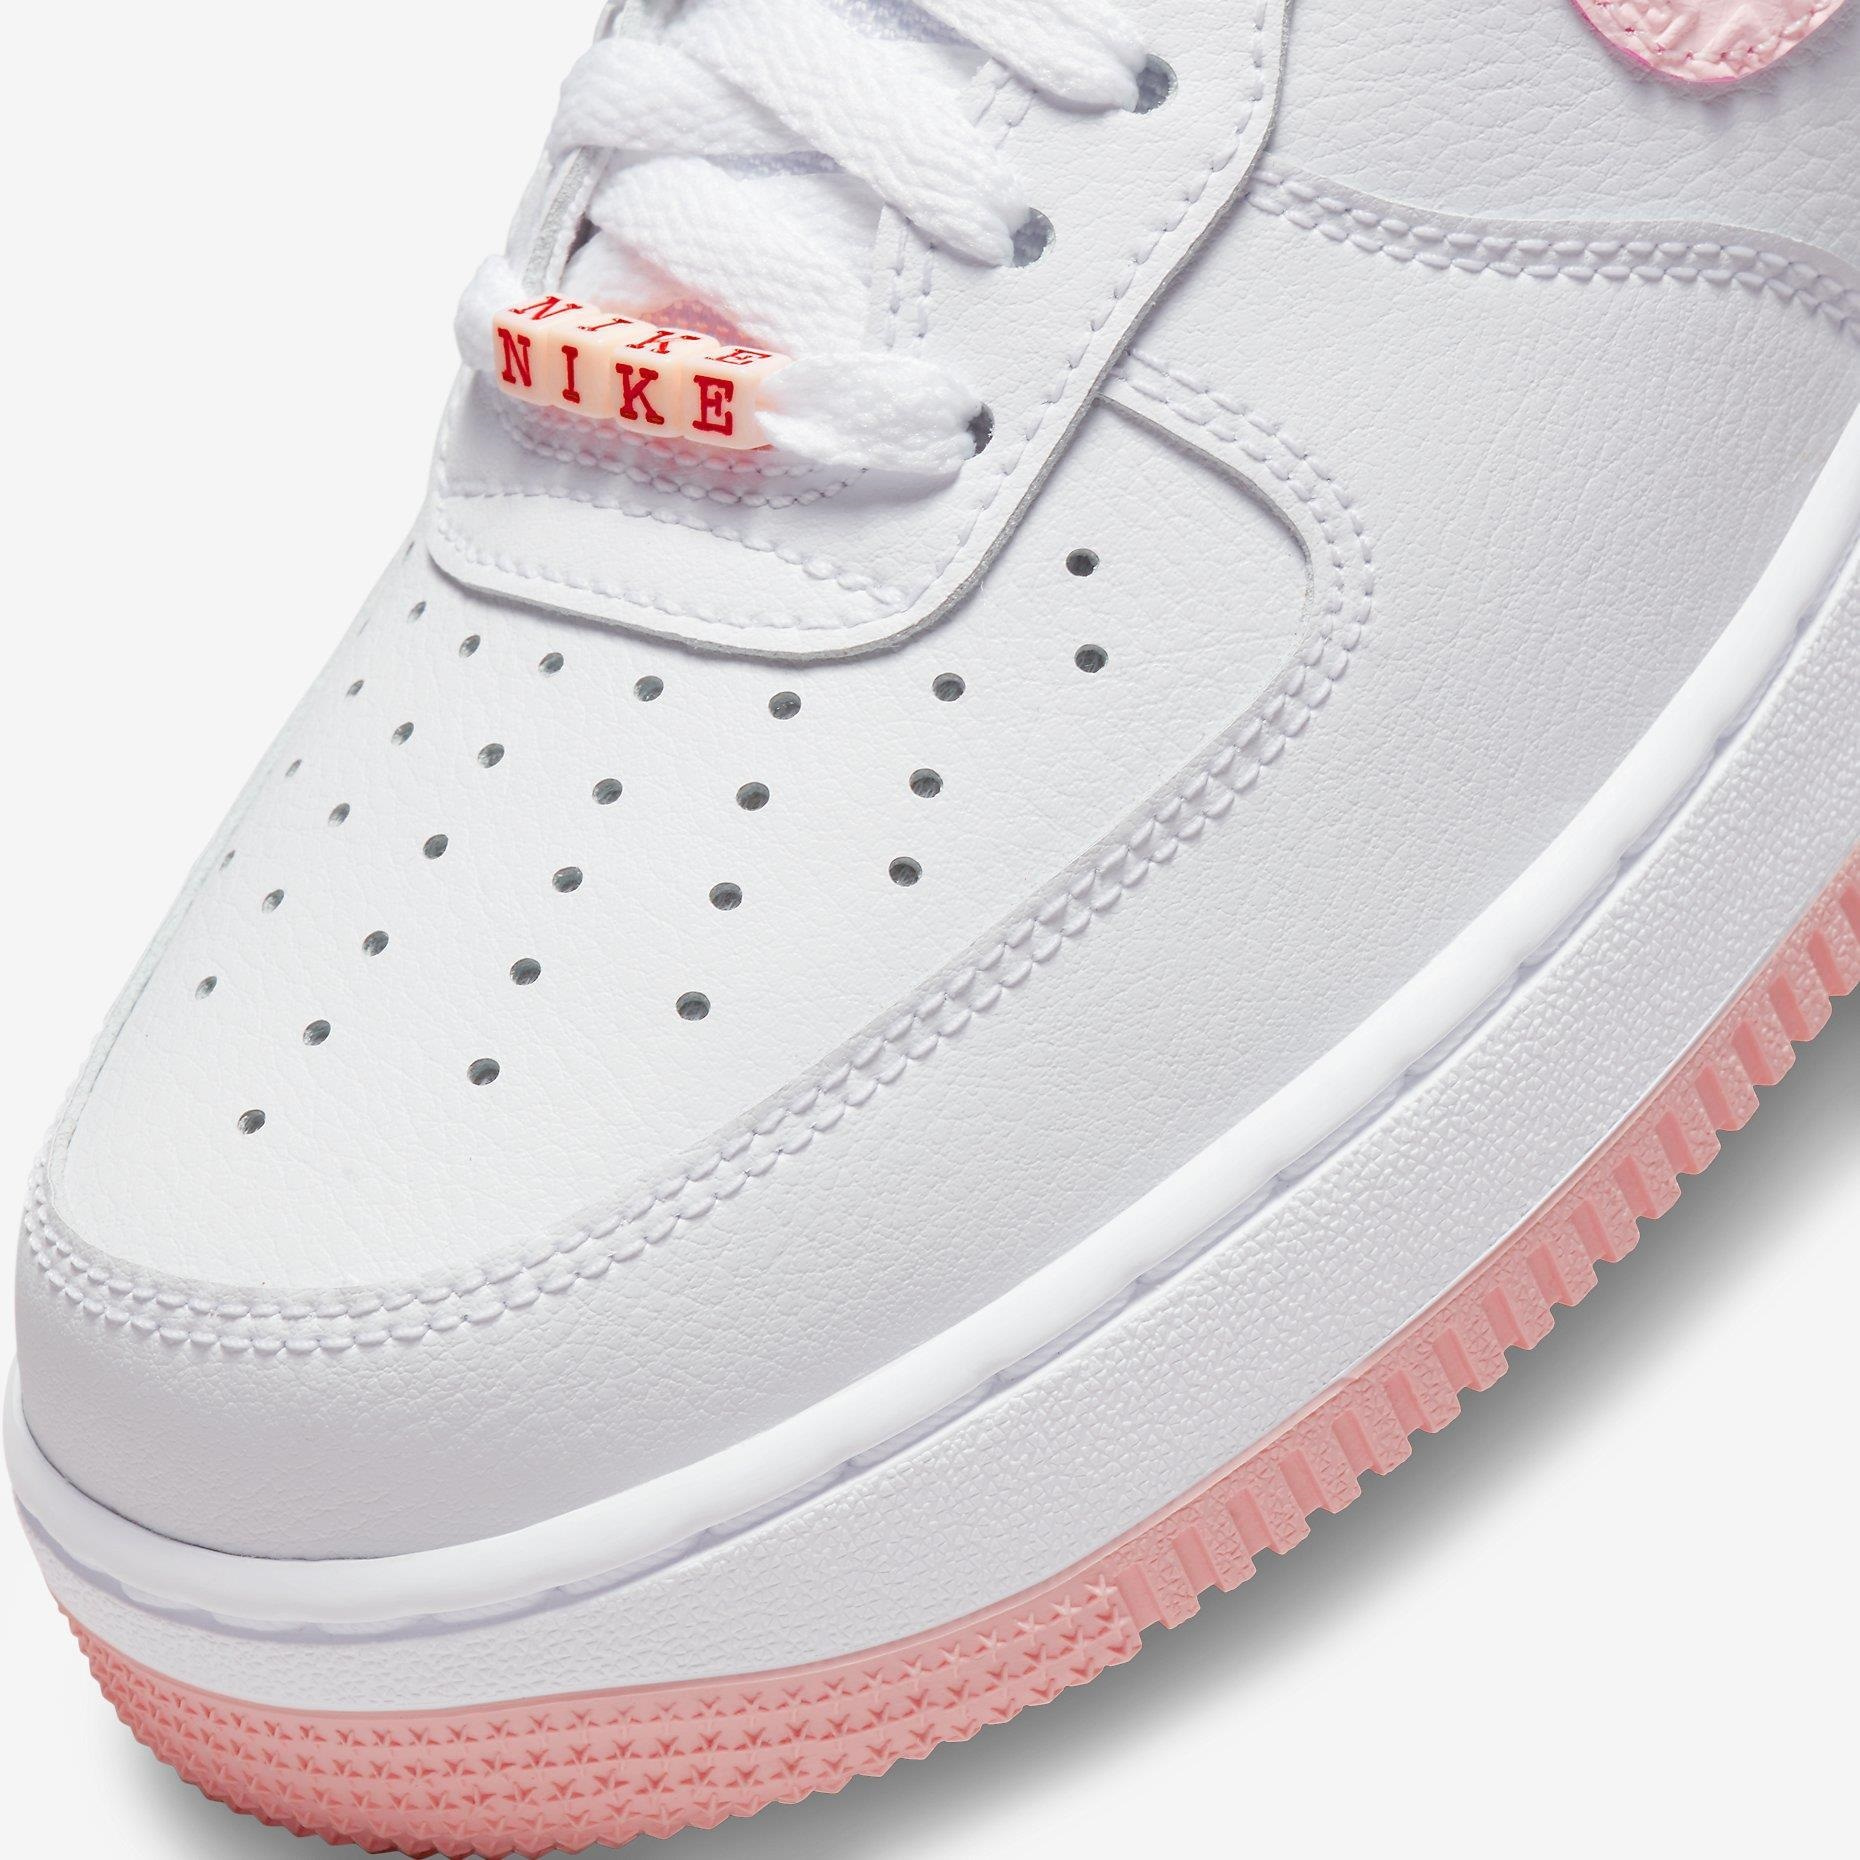 GIÀY NỮ NIKE AIR FORCE 1 07 LOW VD VALENTINE S DAY WHITE ATMOSPHERE UNIVERSITY RED SAIL DQ9320-100 7